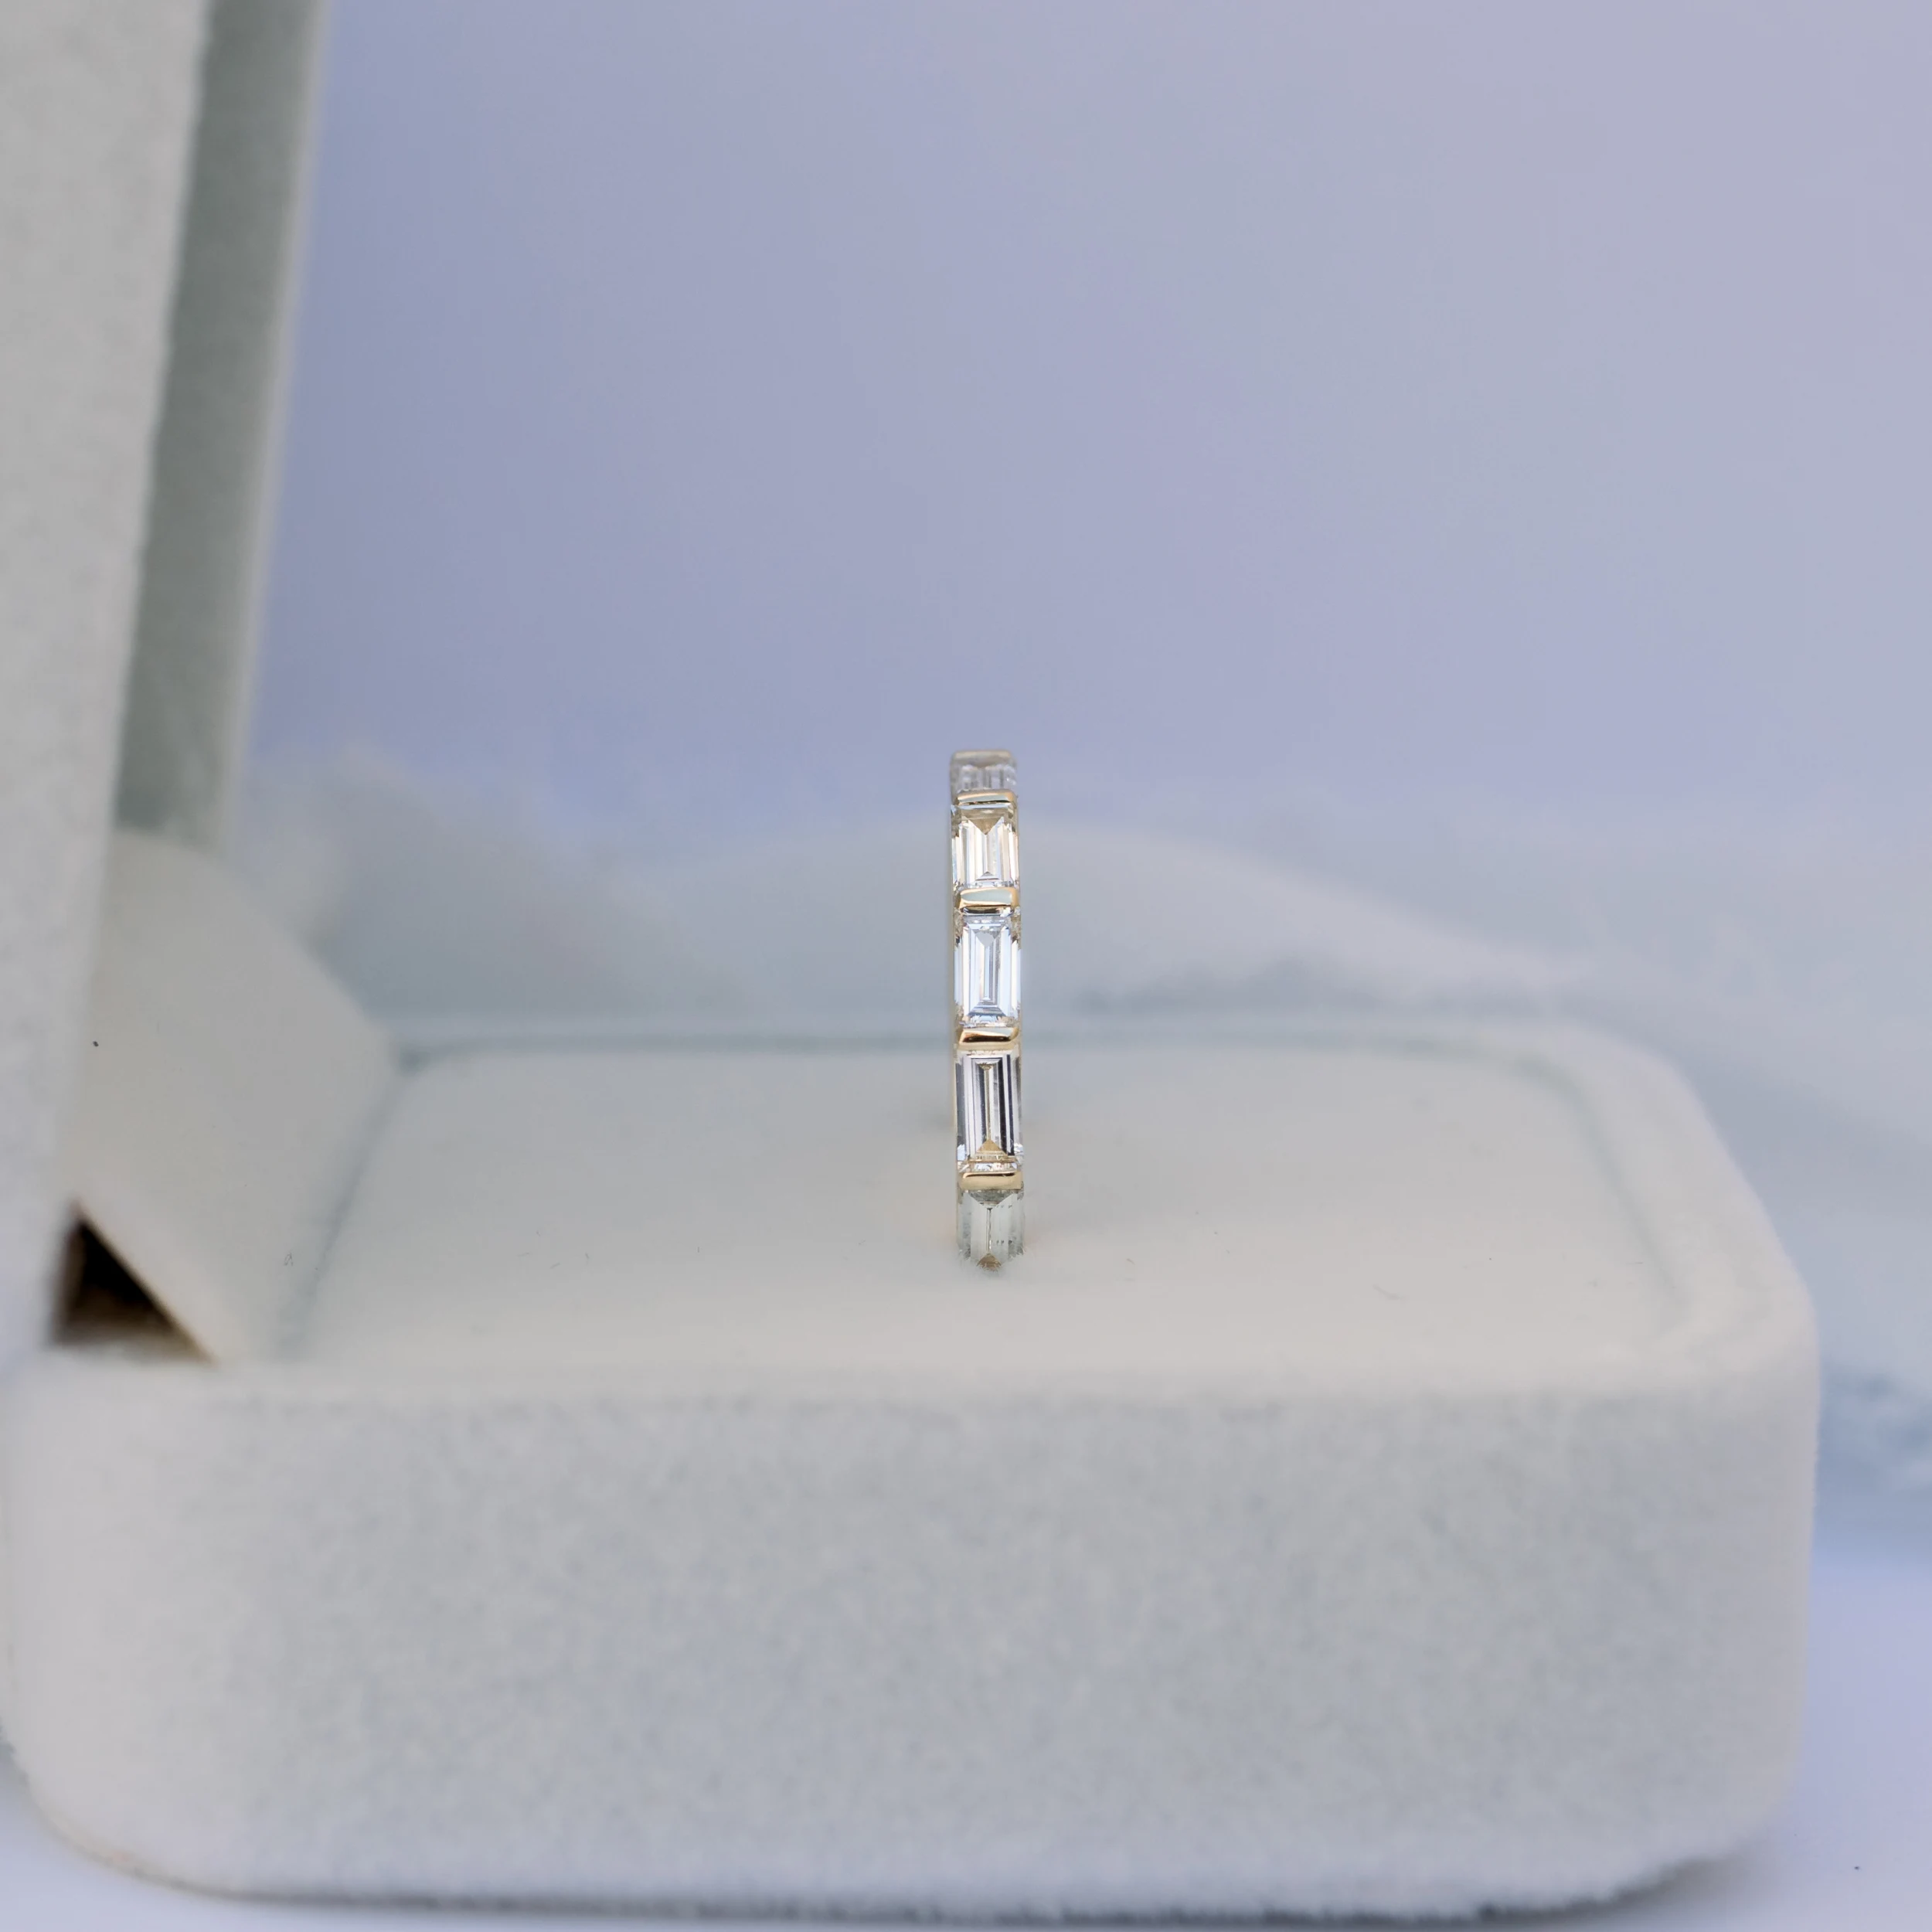 Exceptional Quality 1.1 ct Lab Diamonds set in 14k Yellow Gold Baguette East-West Three Quarter Band in 14k Yellow Gold 1.1ctw (Side View)